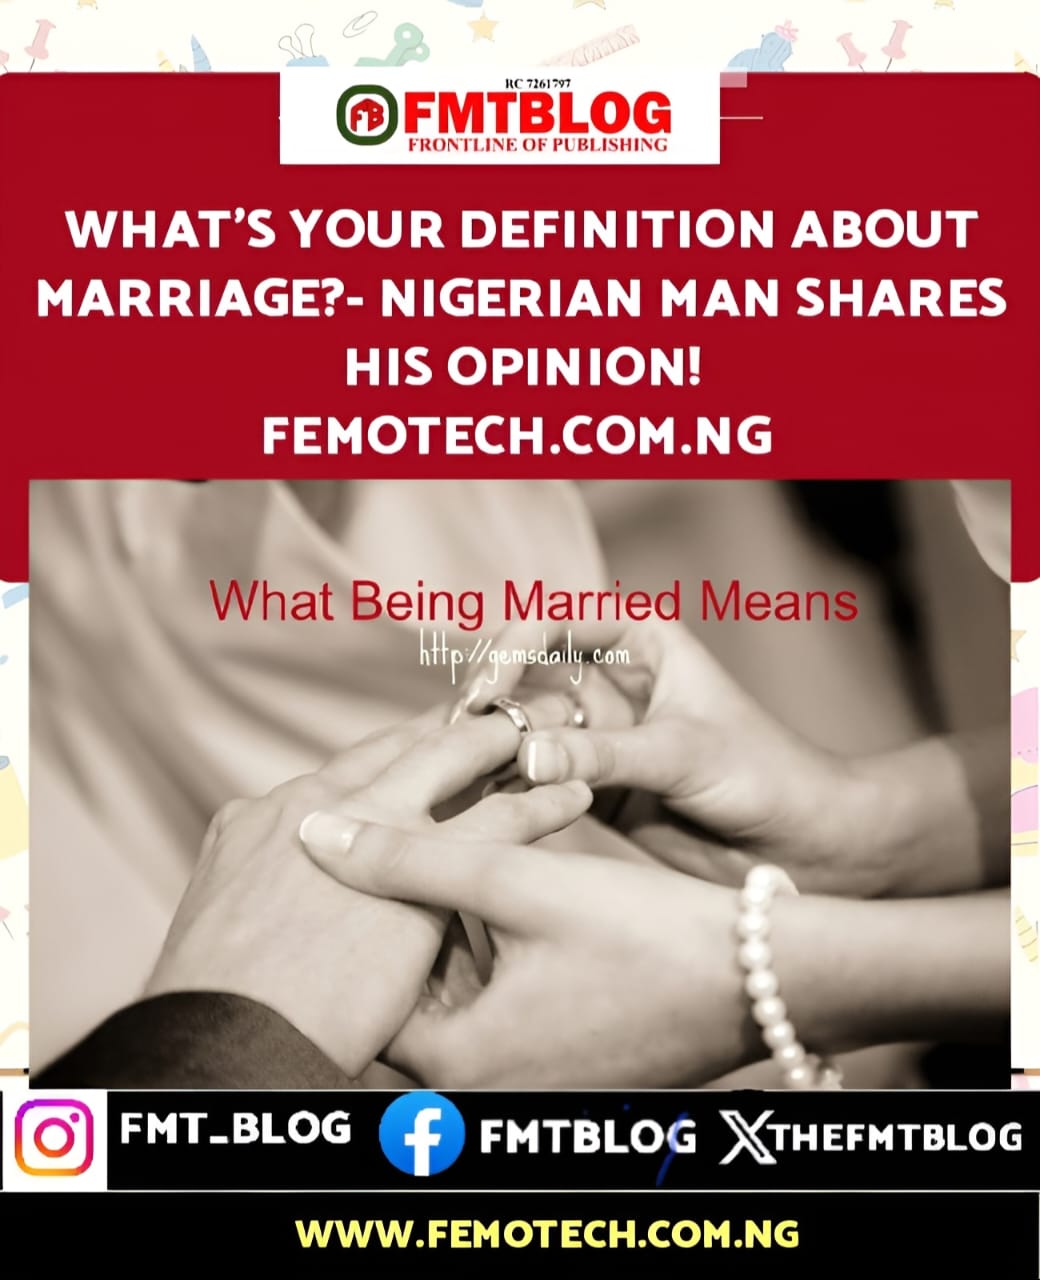 What’s Your Definition About Marriage?- Nigerian Man Shares His Opinion!